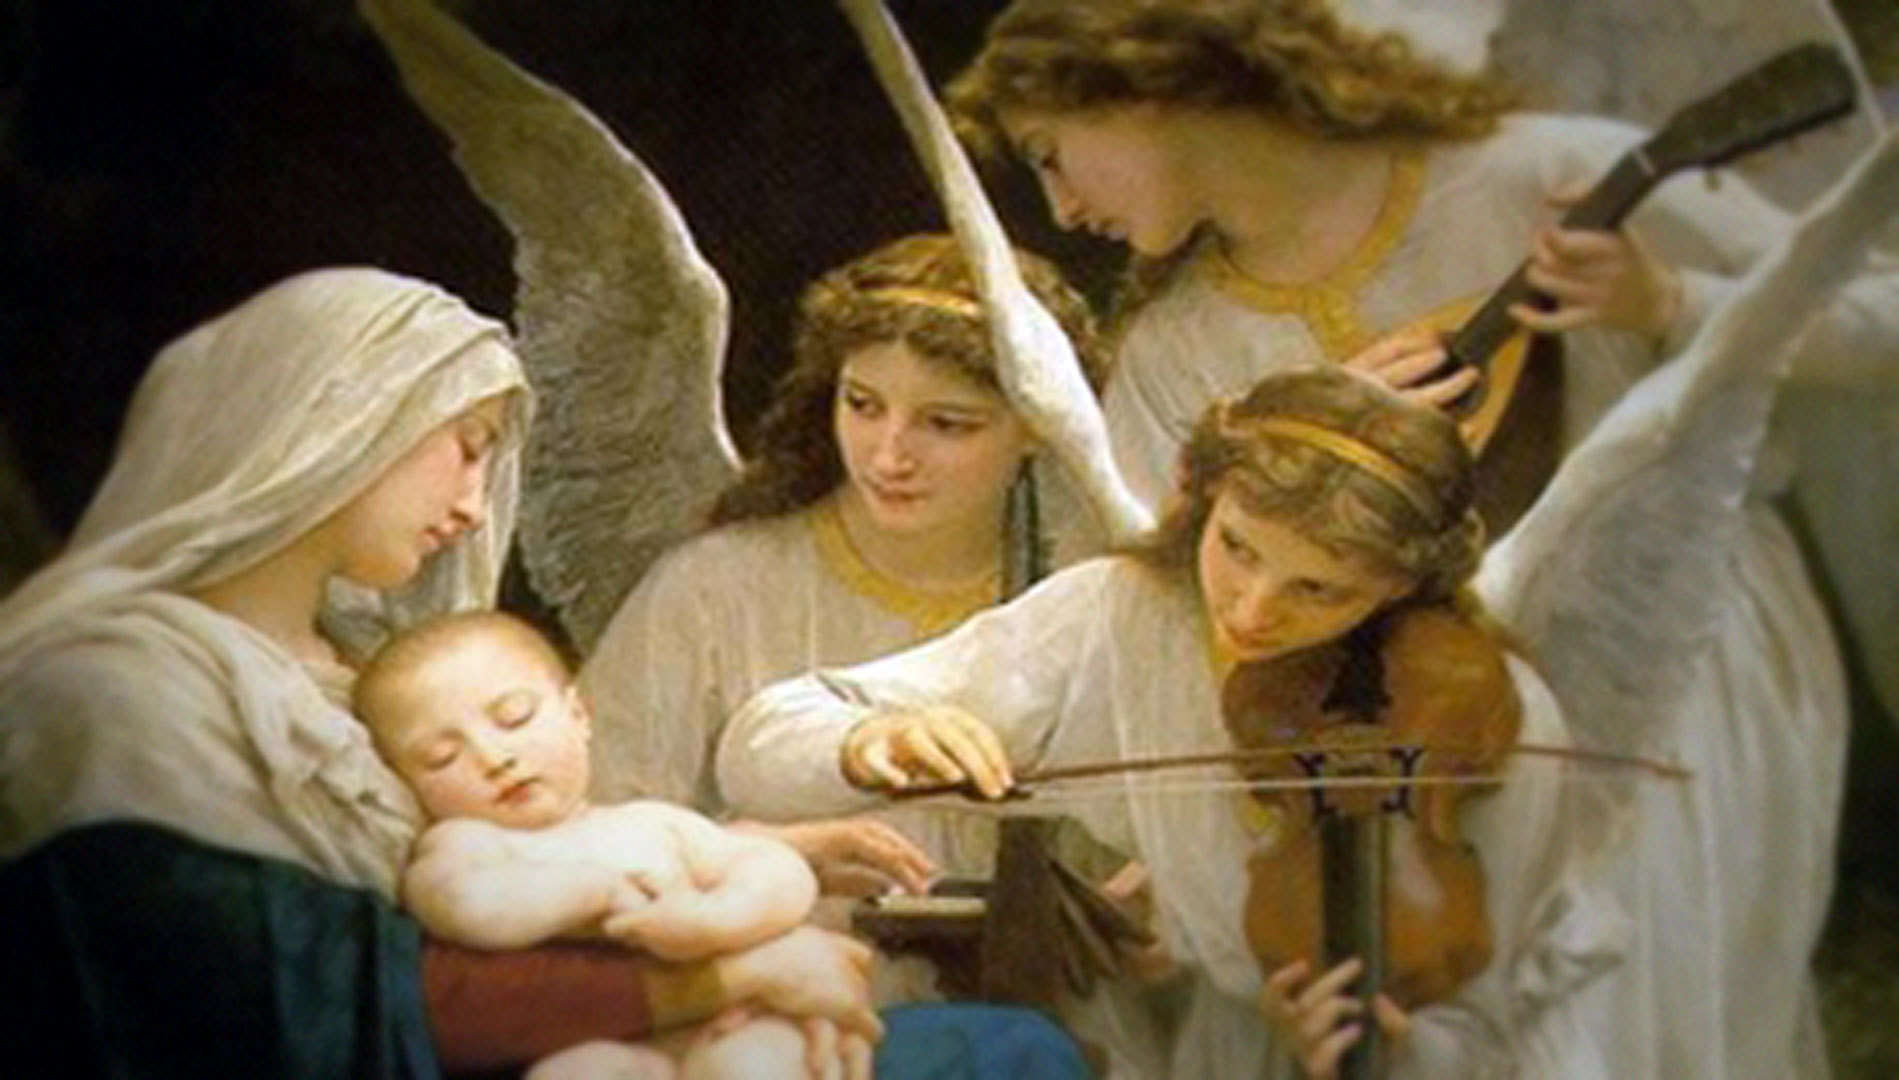 Angels playing music for Mary and baby Jesus